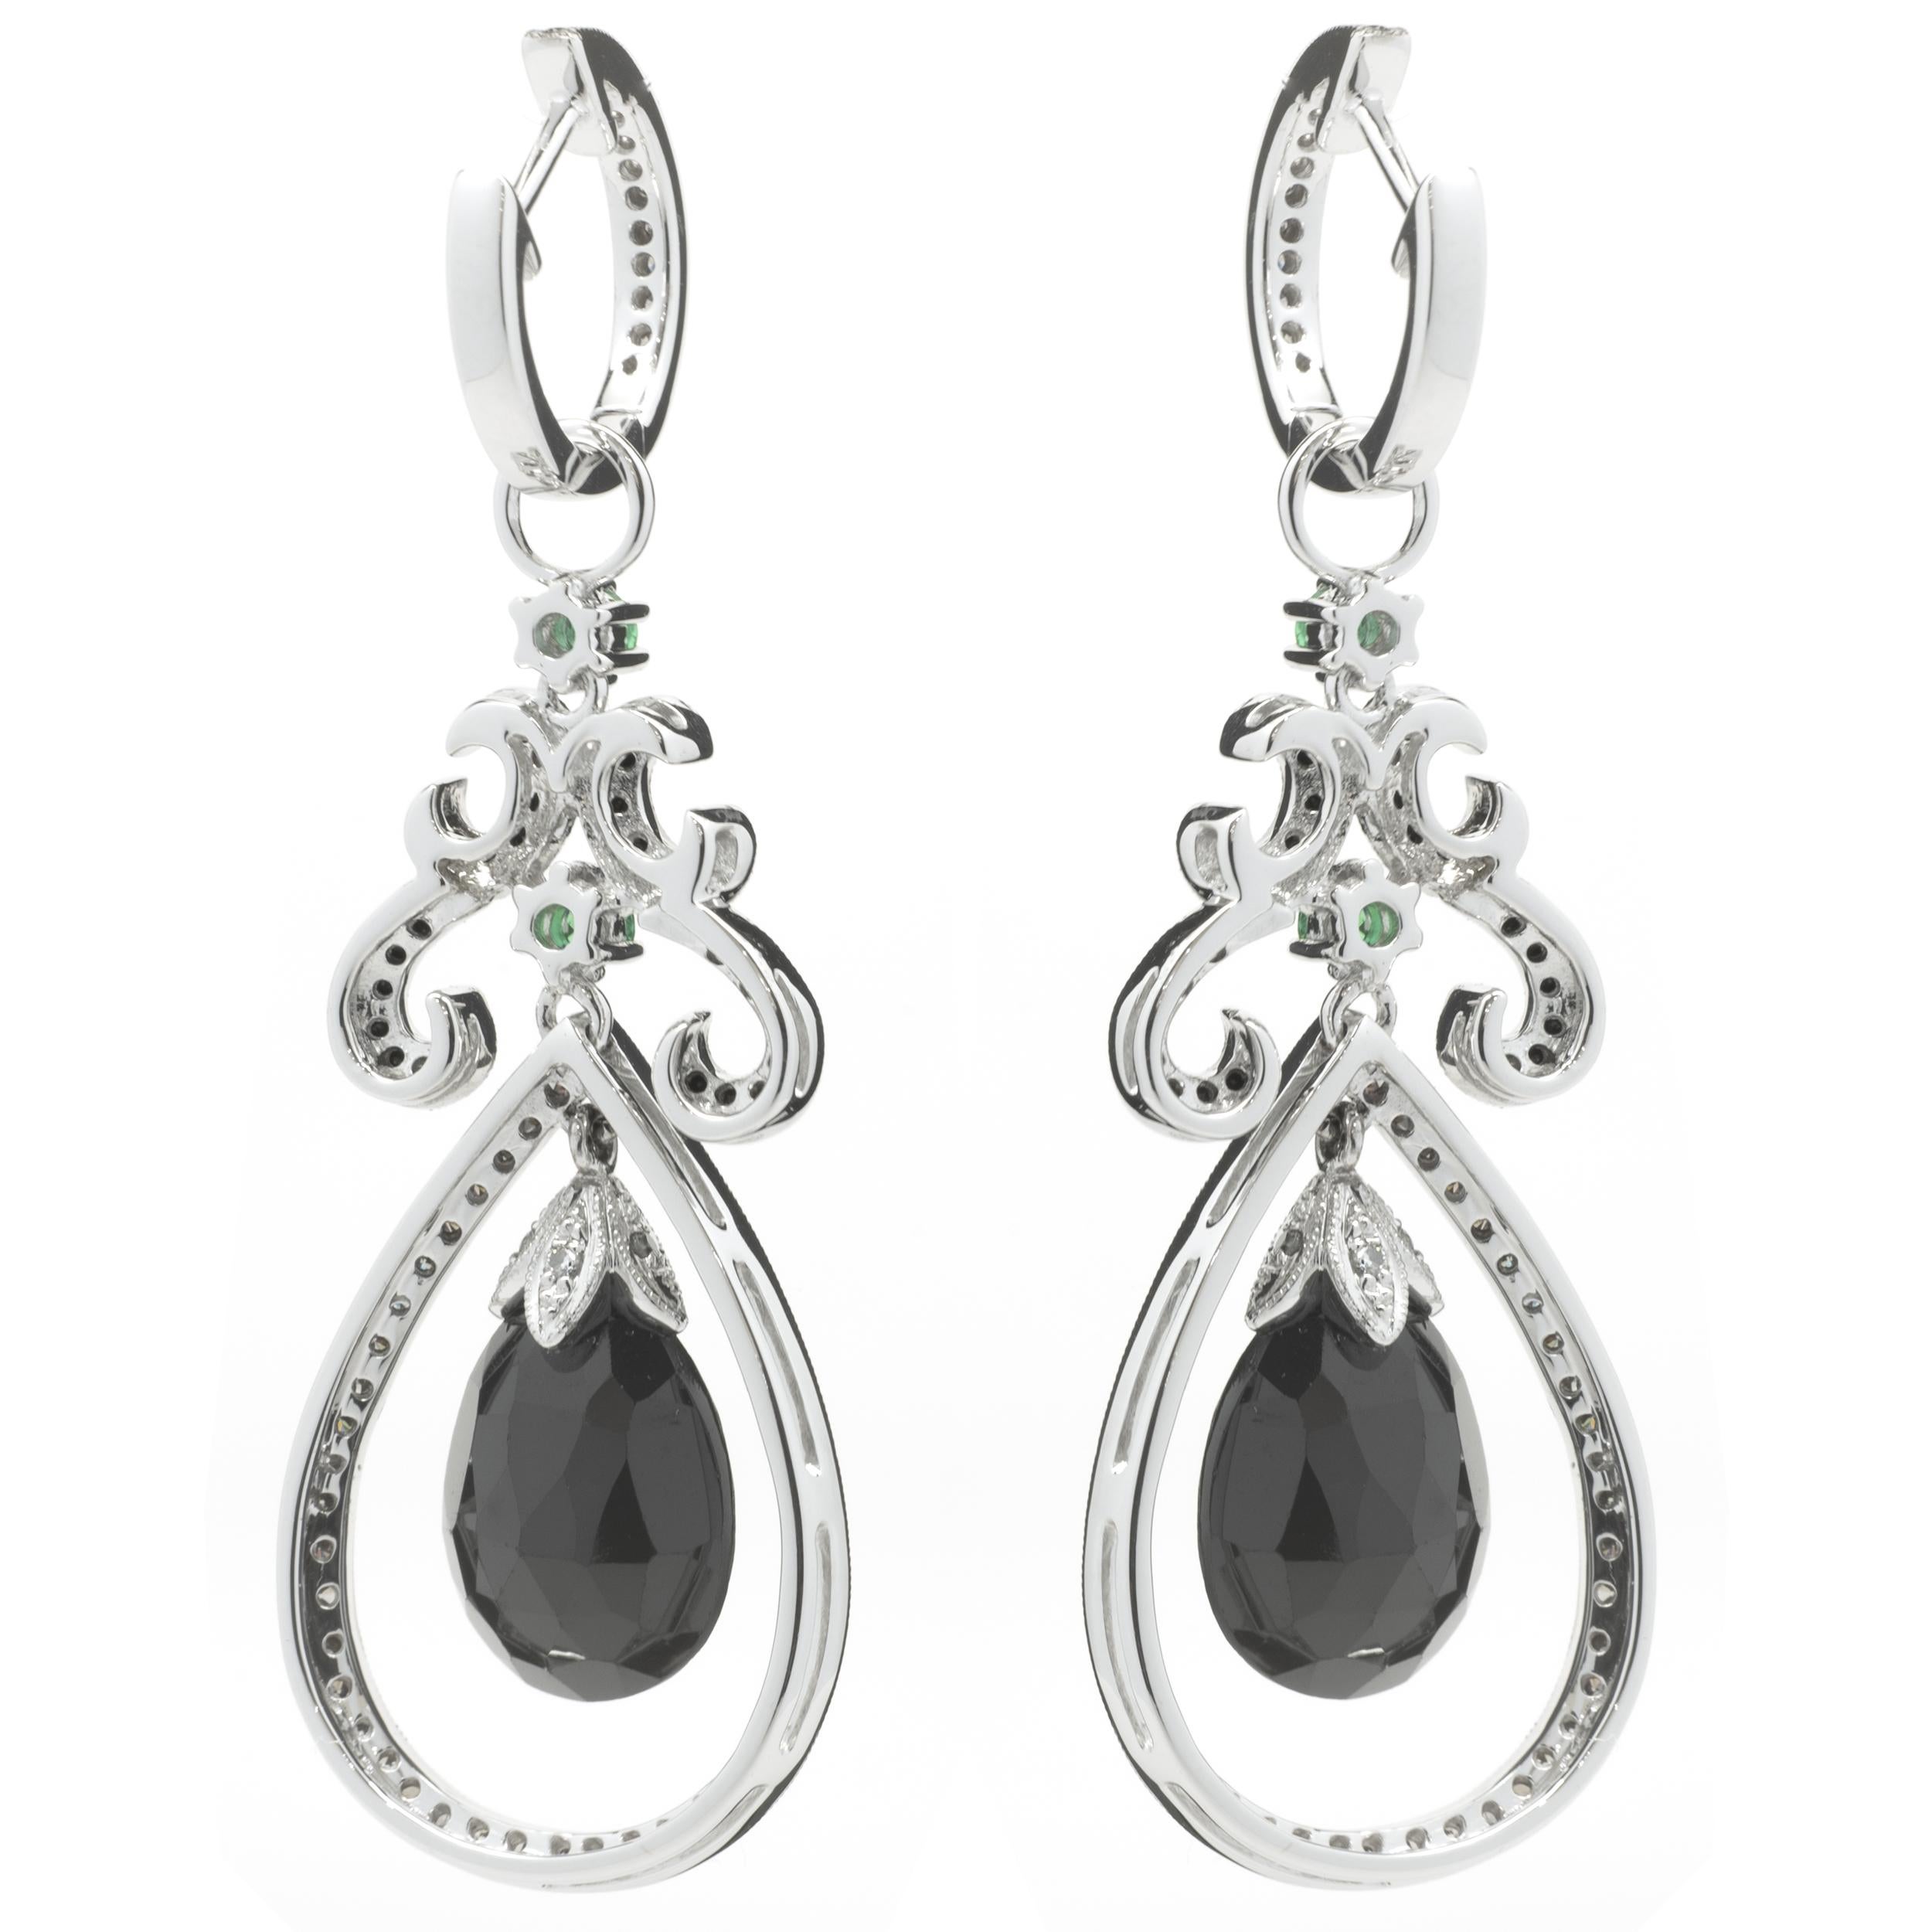 Designer: custom
Material: 18K white gold
Diamond: 140 round cut = 1.17cttw 
Color: chocolate 
Clarity: SI
Dimensions: earrings measure 44 X 17
Weight: 12.66 grams
